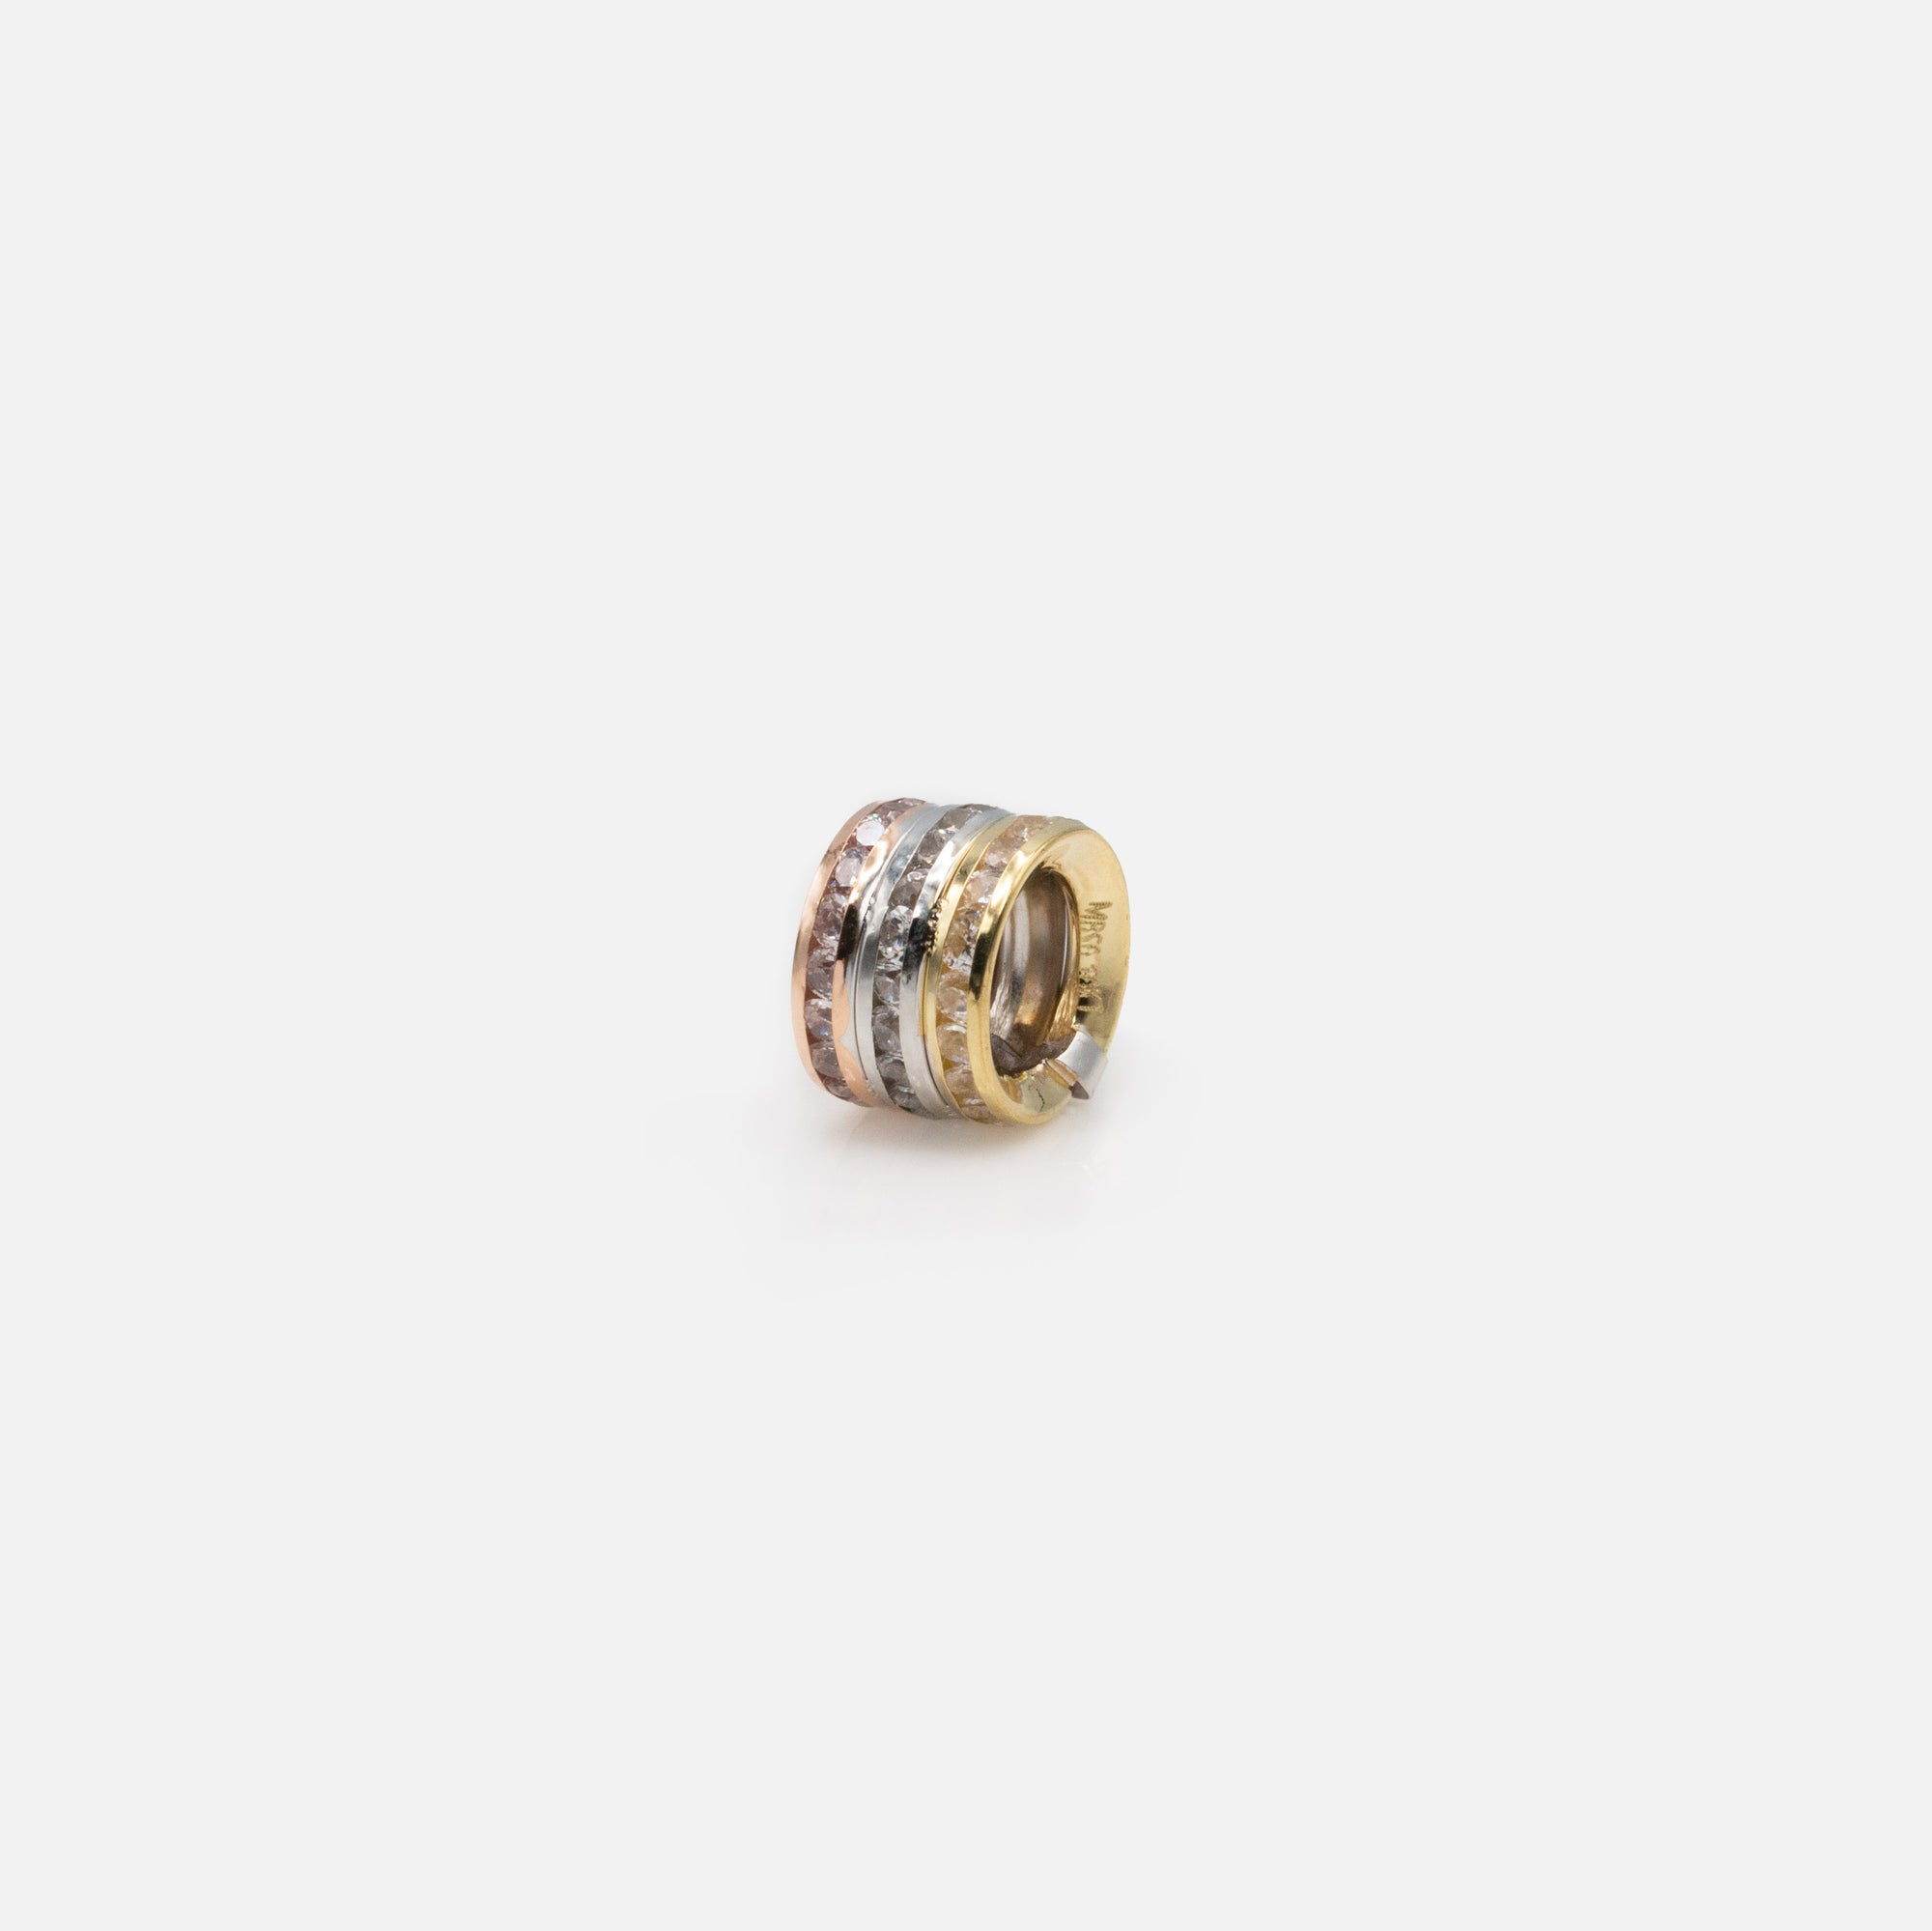 3-Tone Cylinder Charm with Cubic Zirconia in 10k Gold